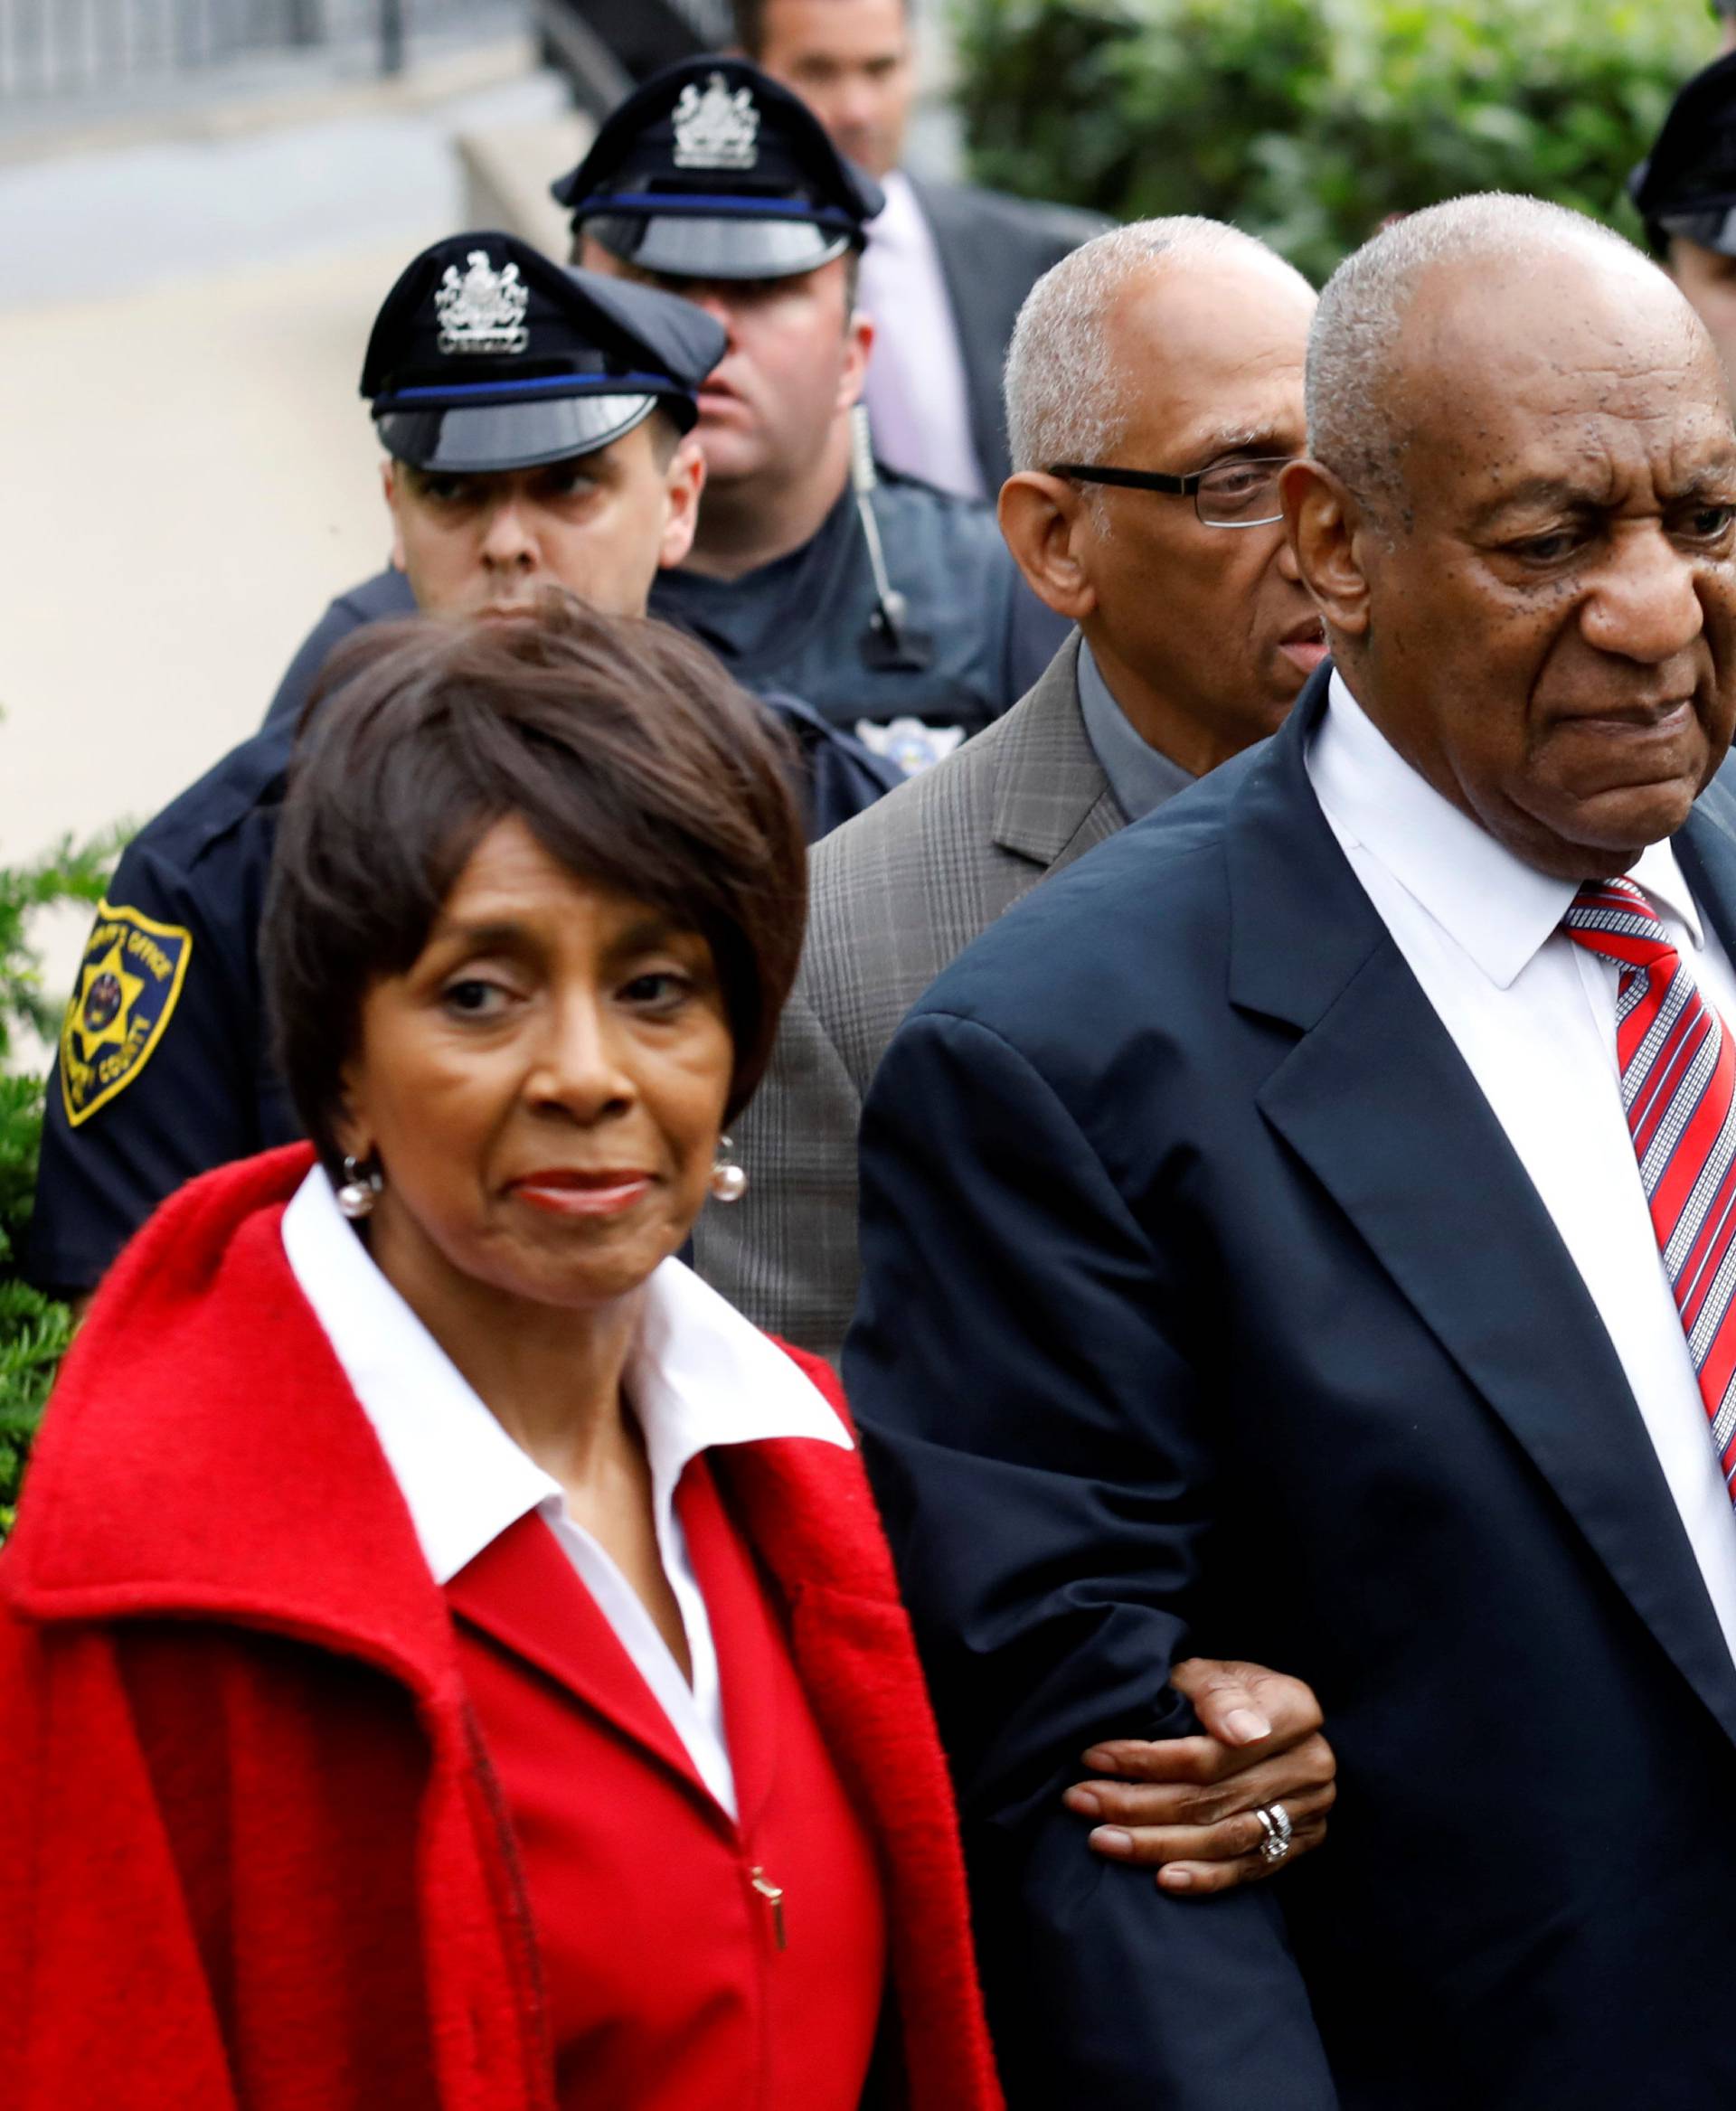 Actor and comedian Bill Cosby leaves with John Atchison and Sheila Frazier after the third day of Cosby's sexual assault trial at the Montgomery County Courthouse in Norristown